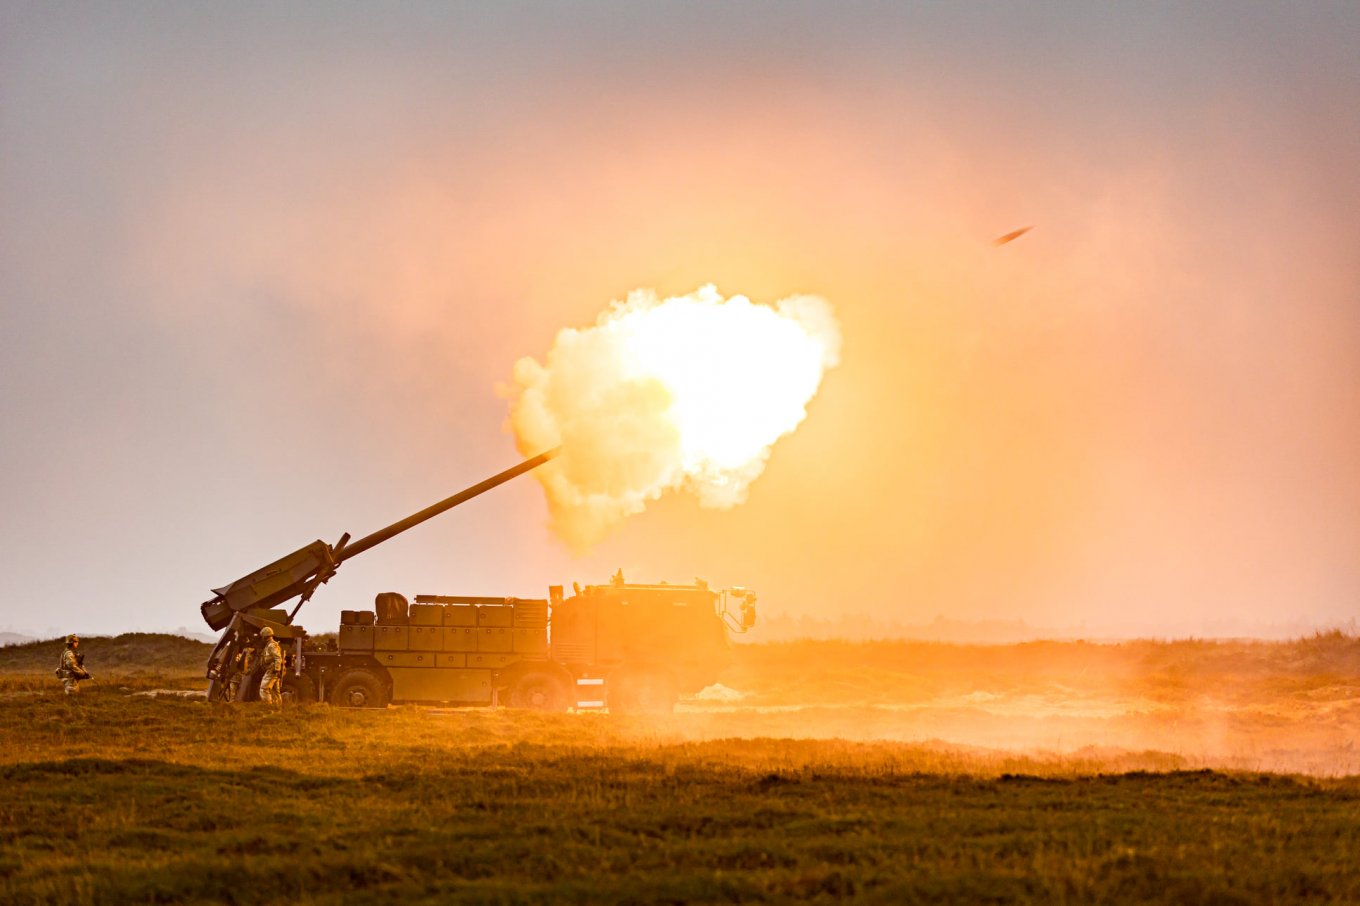 CAESAR self-propelled howitzer operated by the Danish military